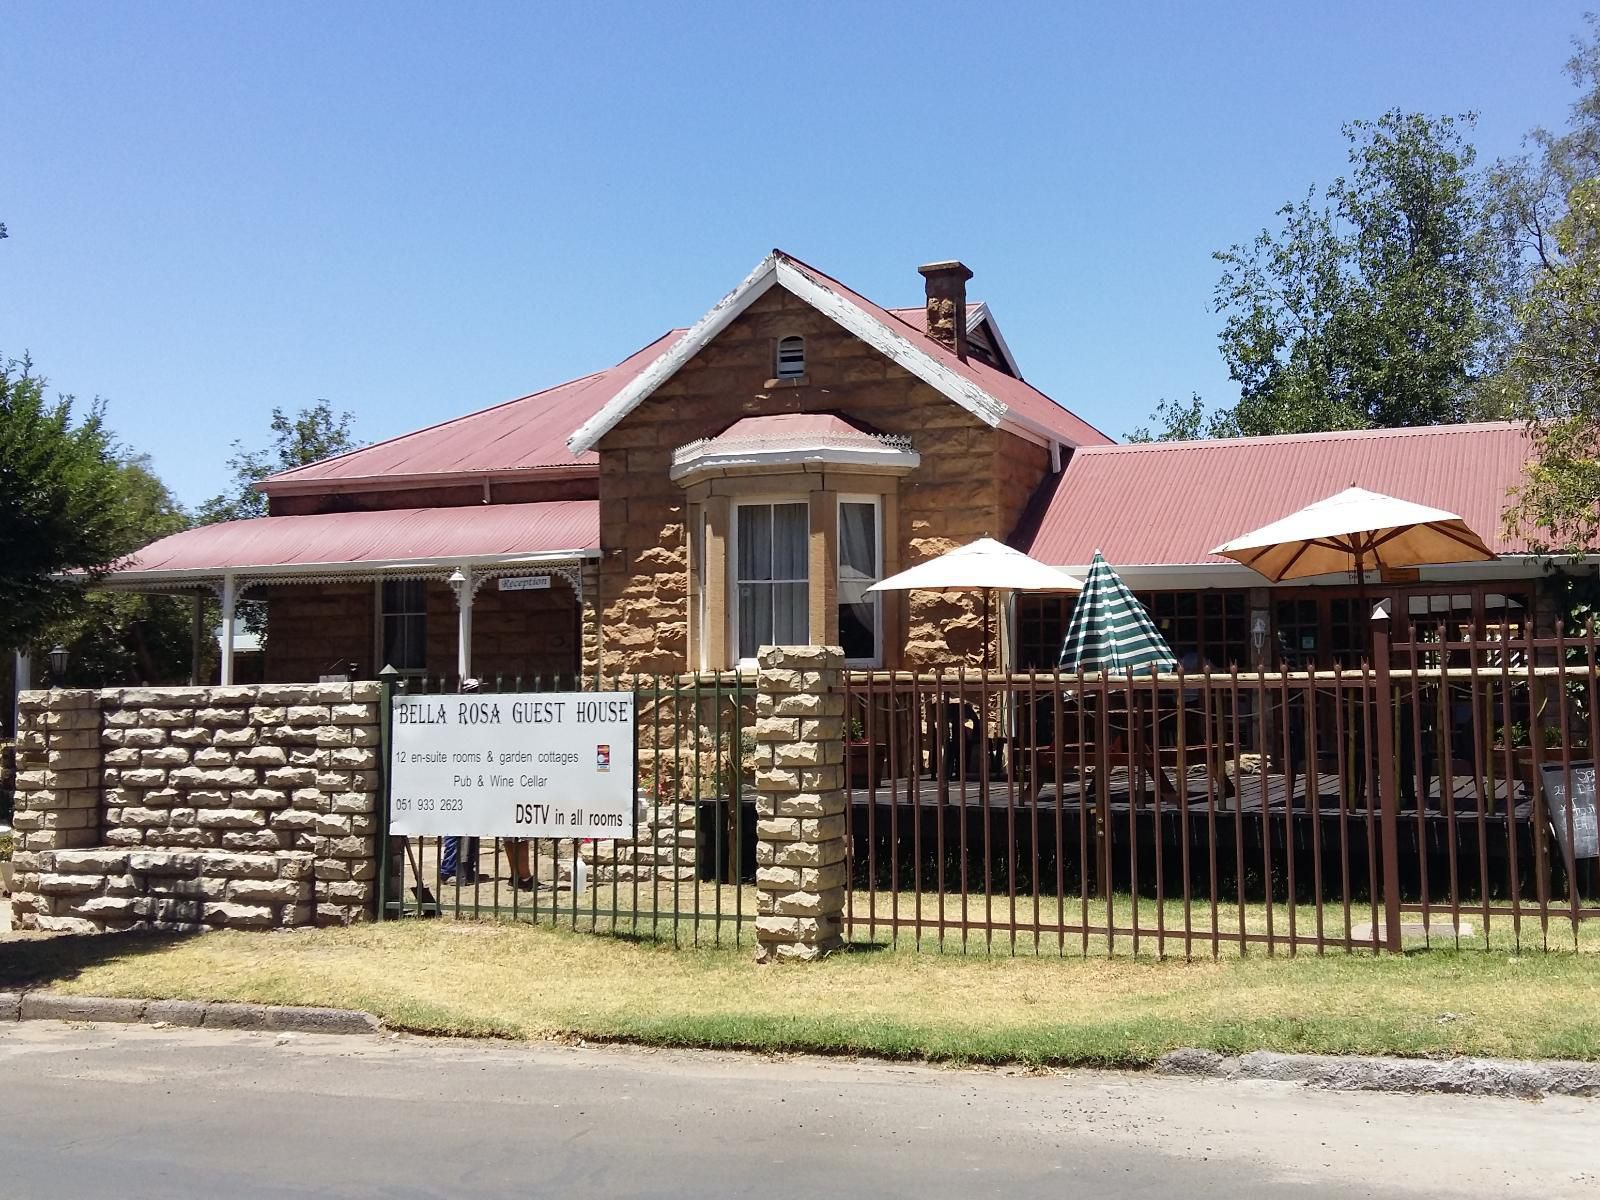 Bella Rosa Guest House Ficksburg Free State South Africa House, Building, Architecture, Sign